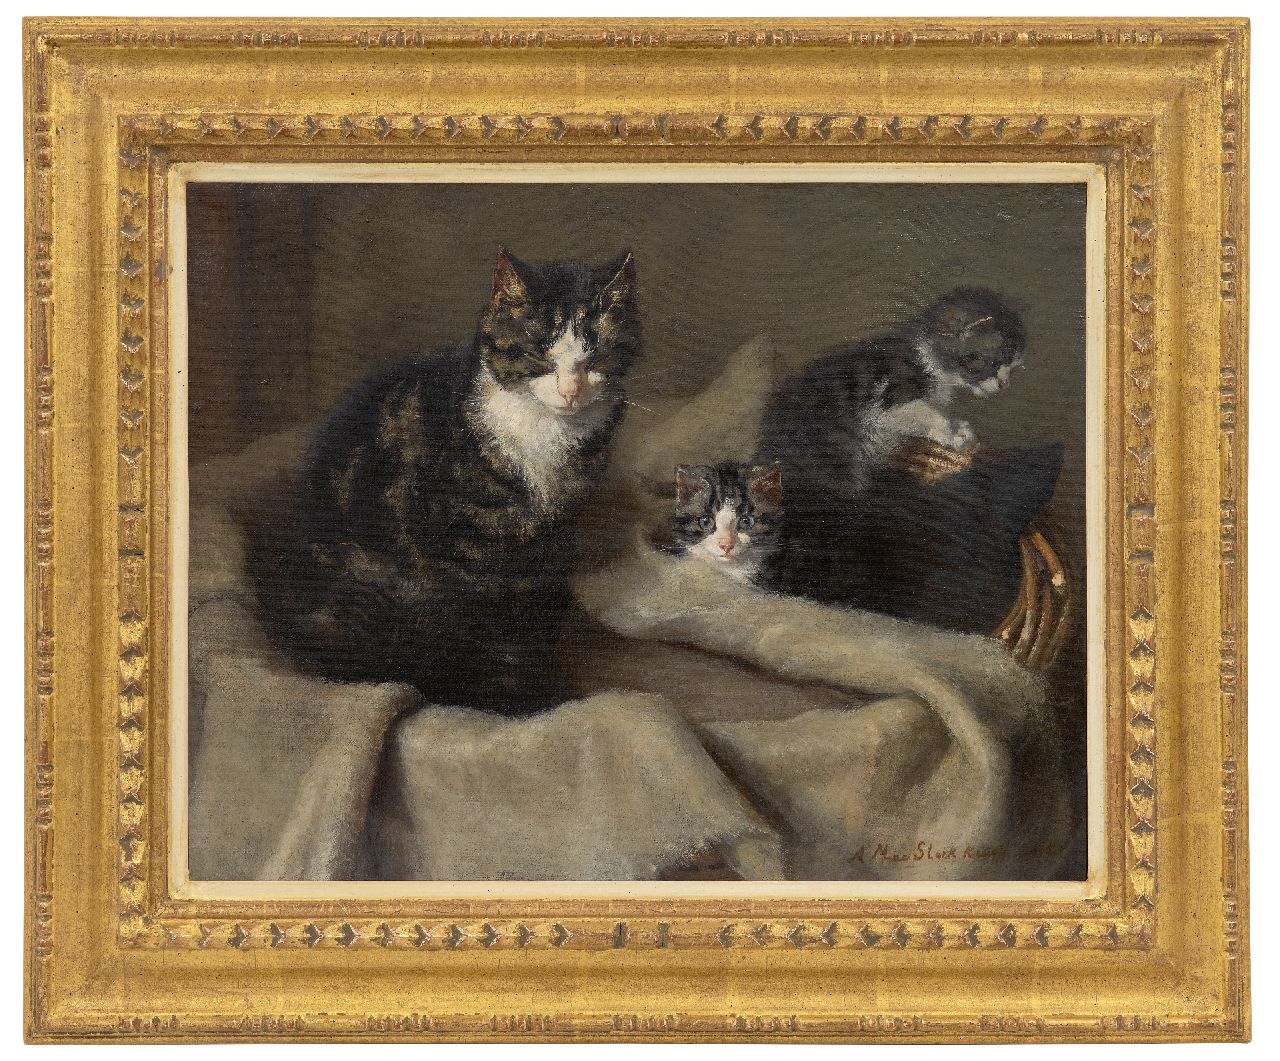 Kruijff A.M.  | Anna Maria Kruijff | Paintings offered for sale | Mother cat with two kittens, oil on canvas 35.2 x 45.4 cm, signed l.r. and dated 1908